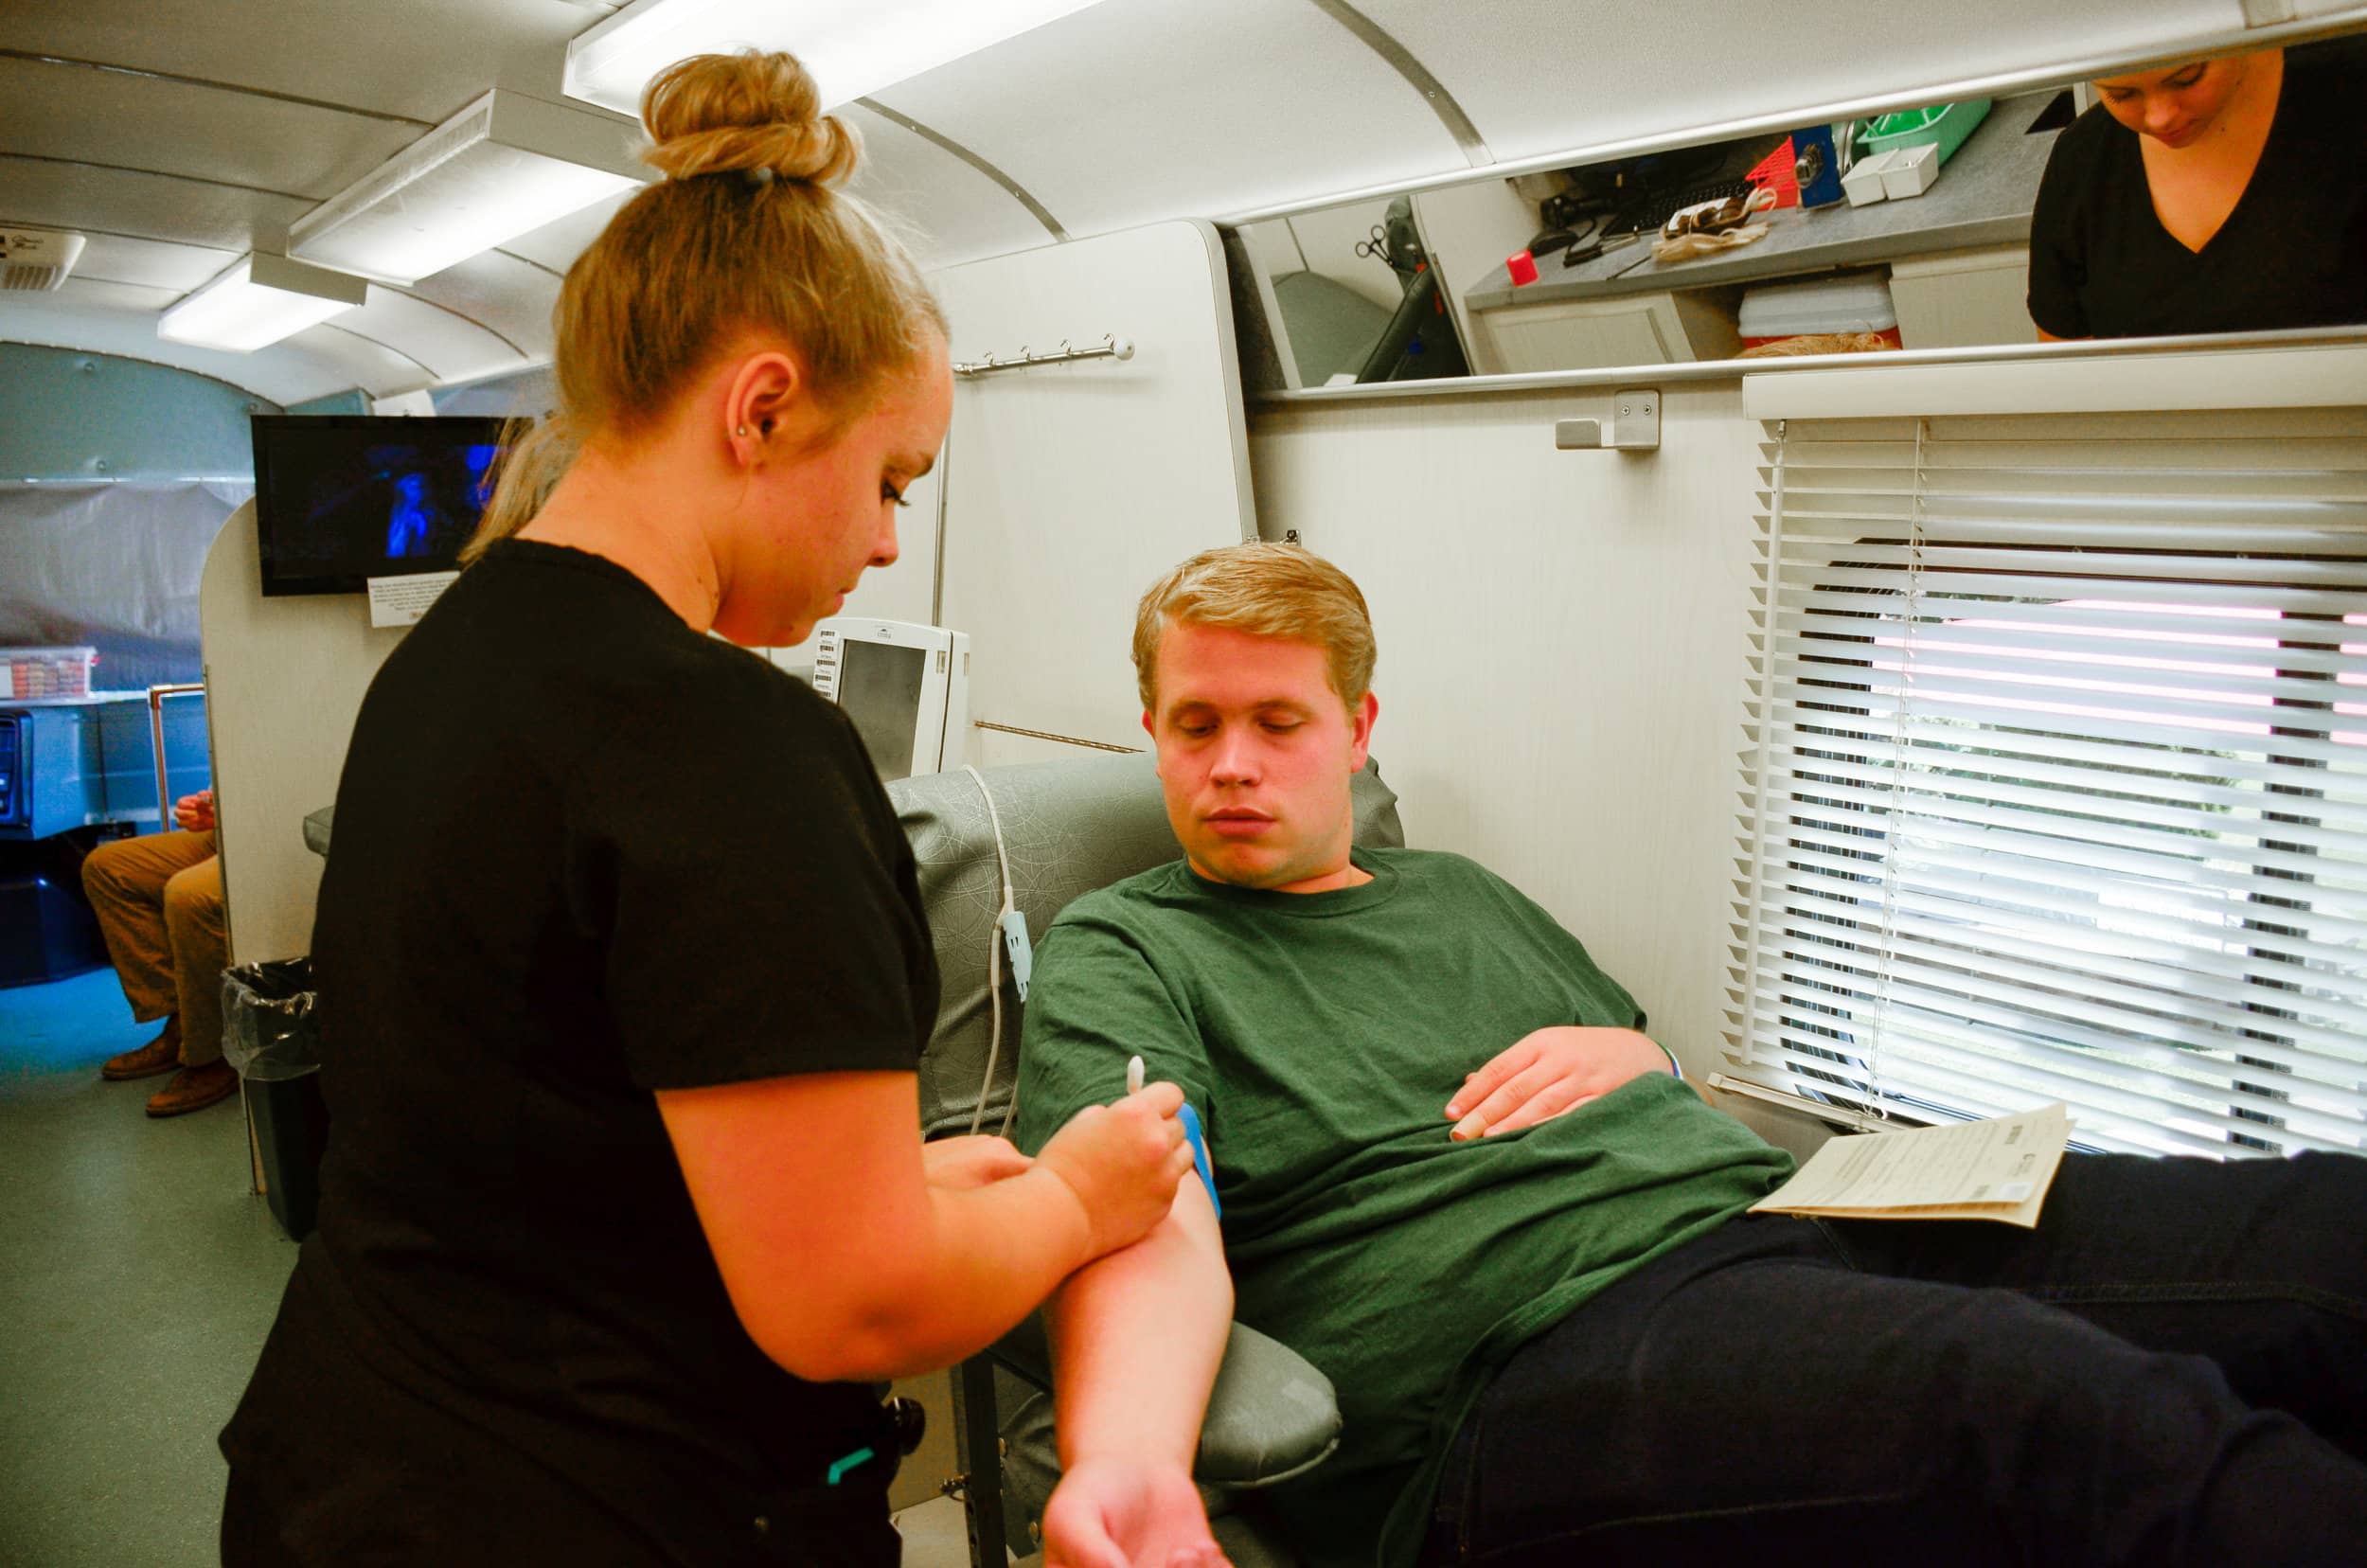 Austin Cathey, sophomore, prepares himself to donate blood because, "it's the right thing to do to help those who need blood."&nbsp;